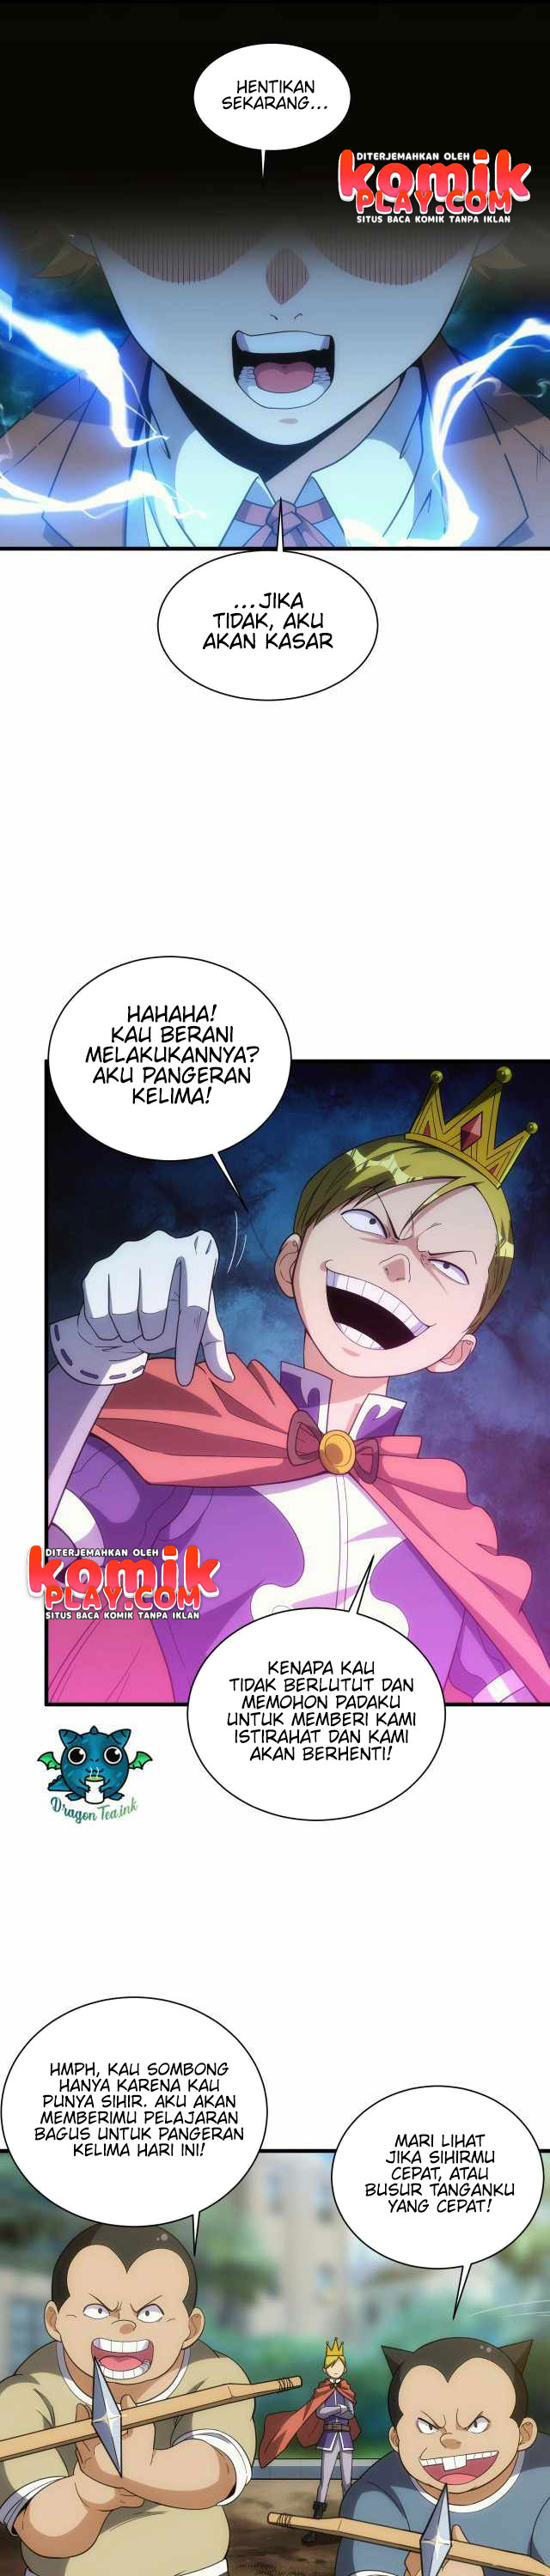 Daoist Magician From Another World Chapter 03